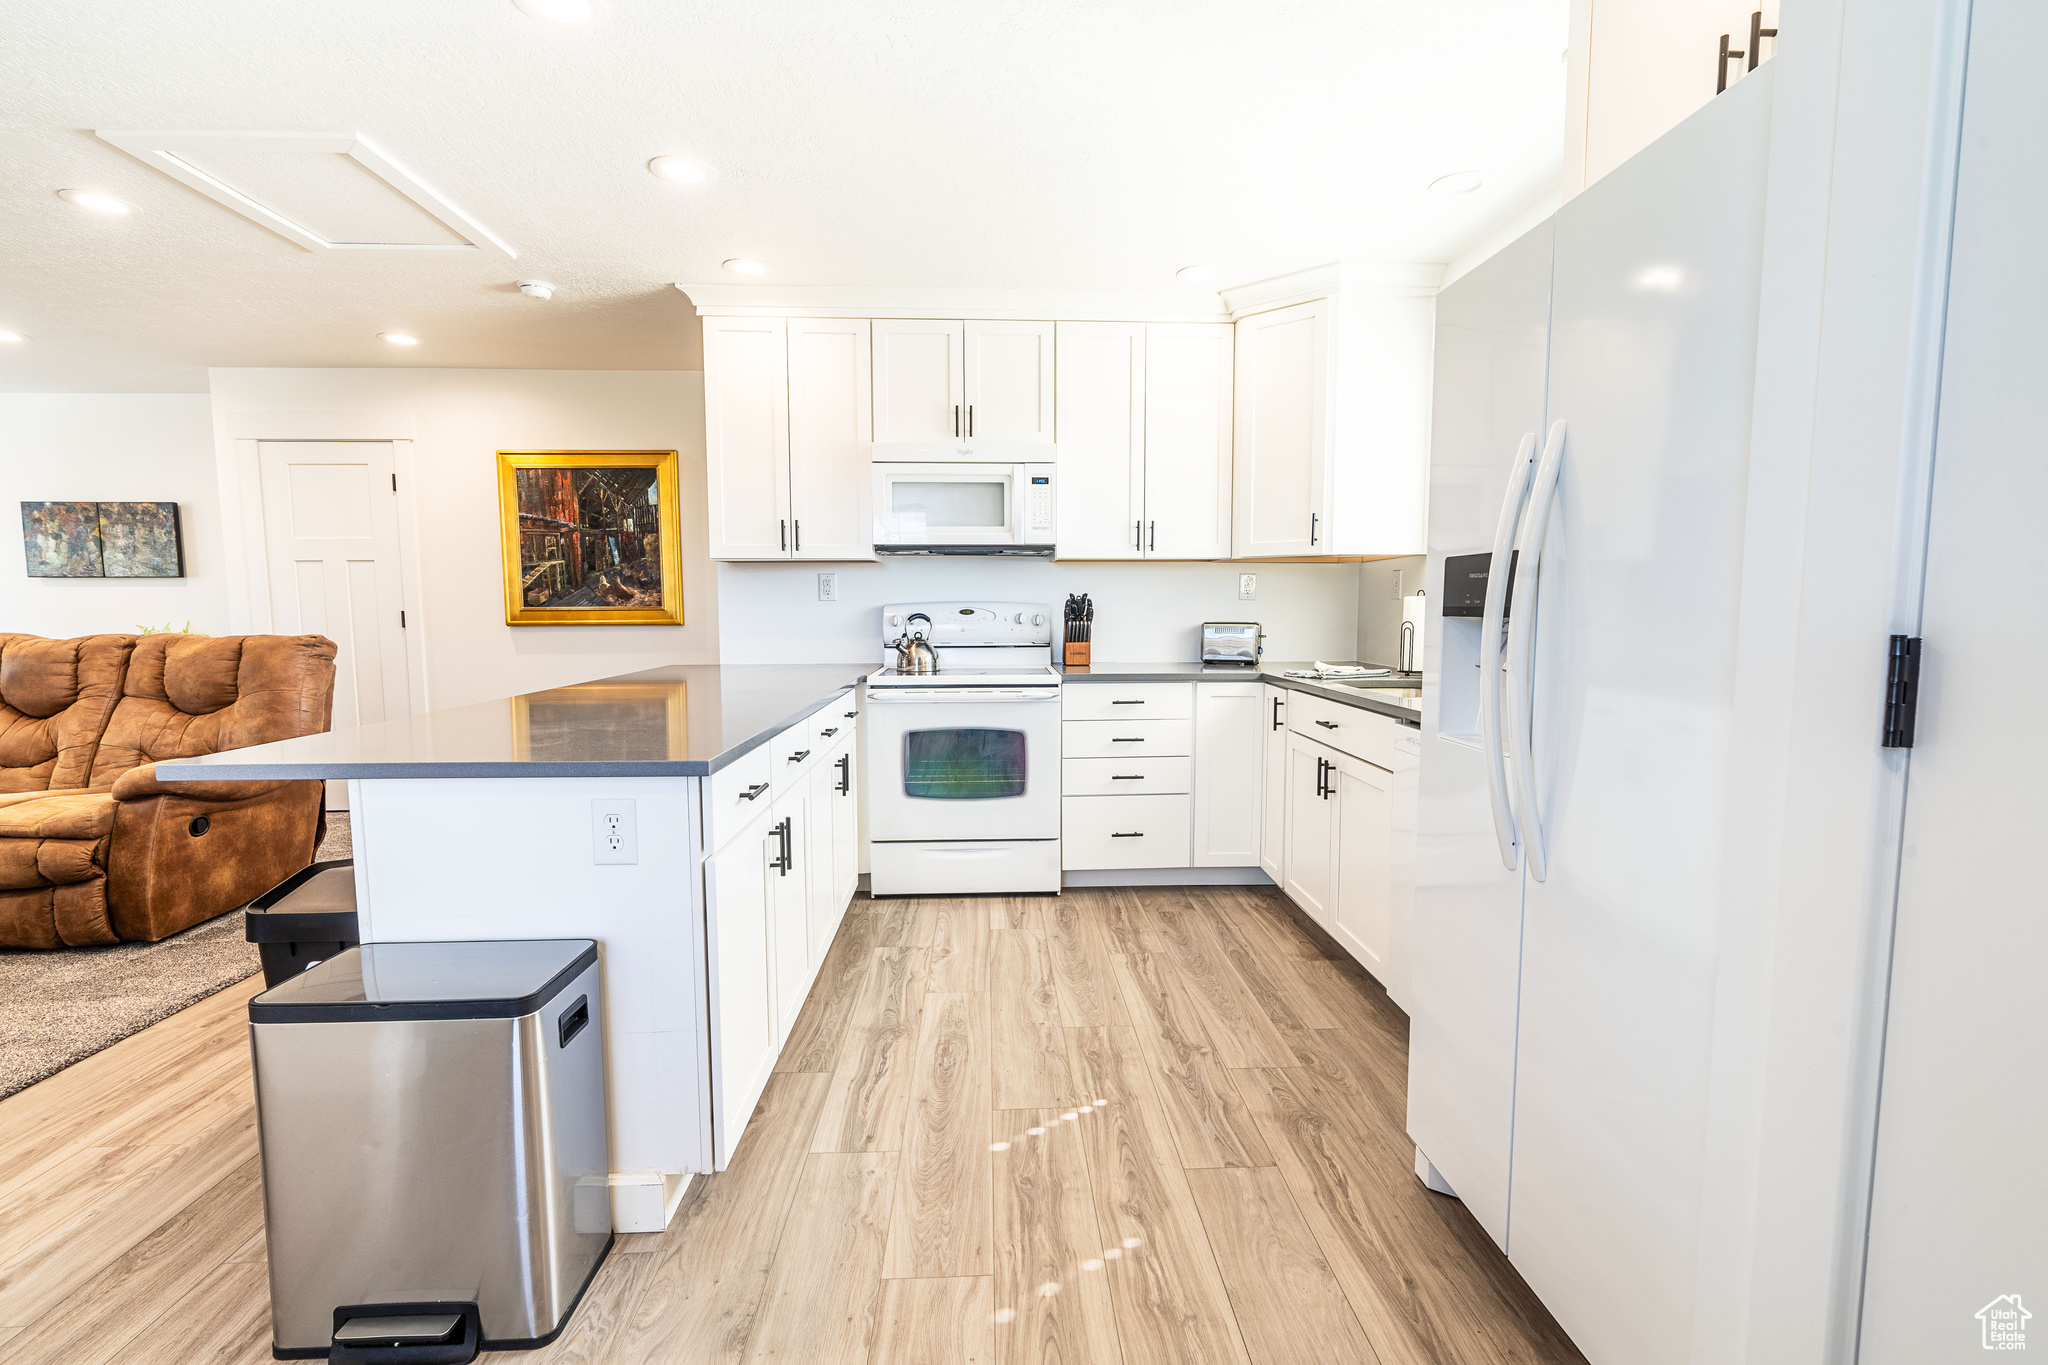 ADU kitchen with white cabinetry, white appliances, a breakfast bar area, and light hardwood / wood-style flooring